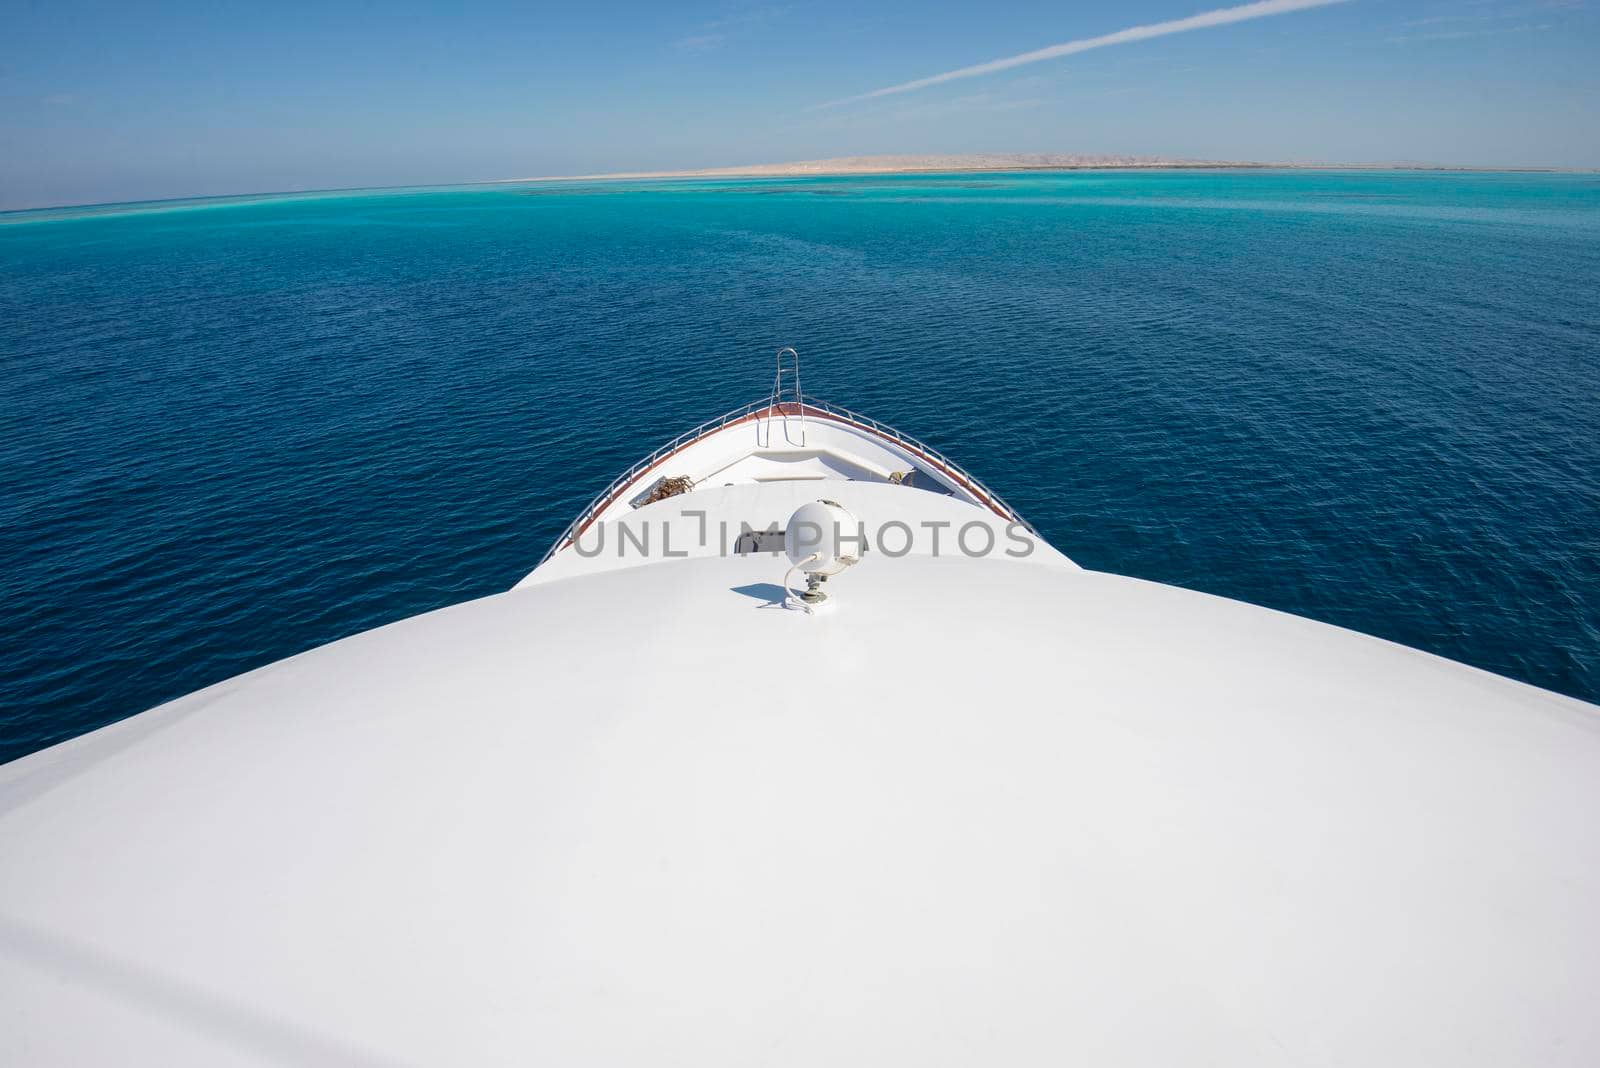 View over the bow deck of a large luxury motor yacht on the ocean with a tropical sea view background